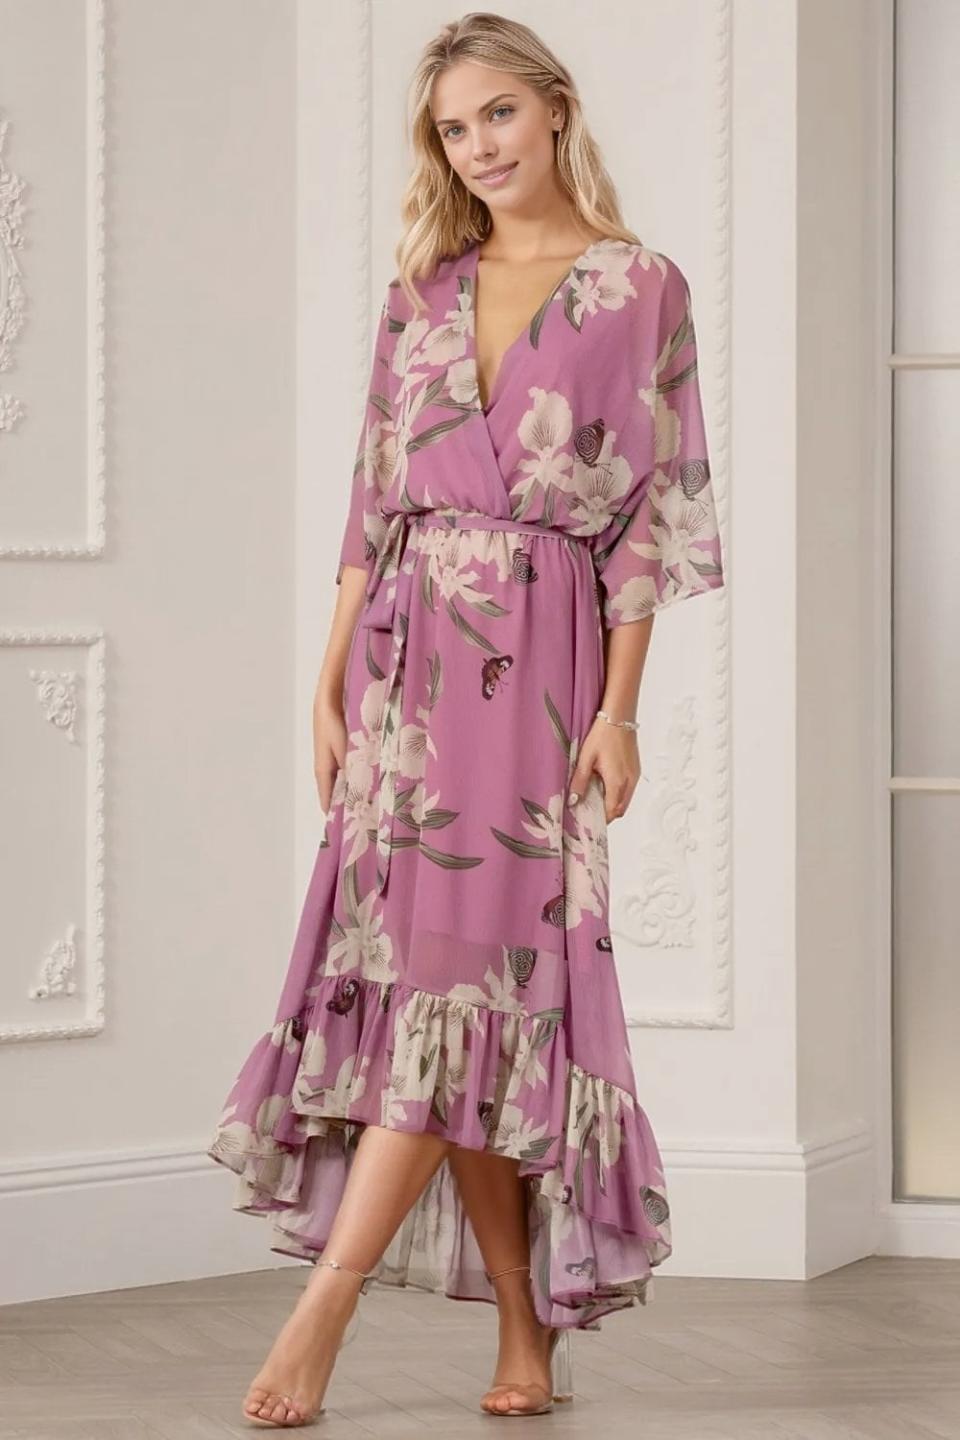 Pair with heels and earrings for a pretty wedding guest outfit you can wear over and over again. (Yumi / John Lewis)